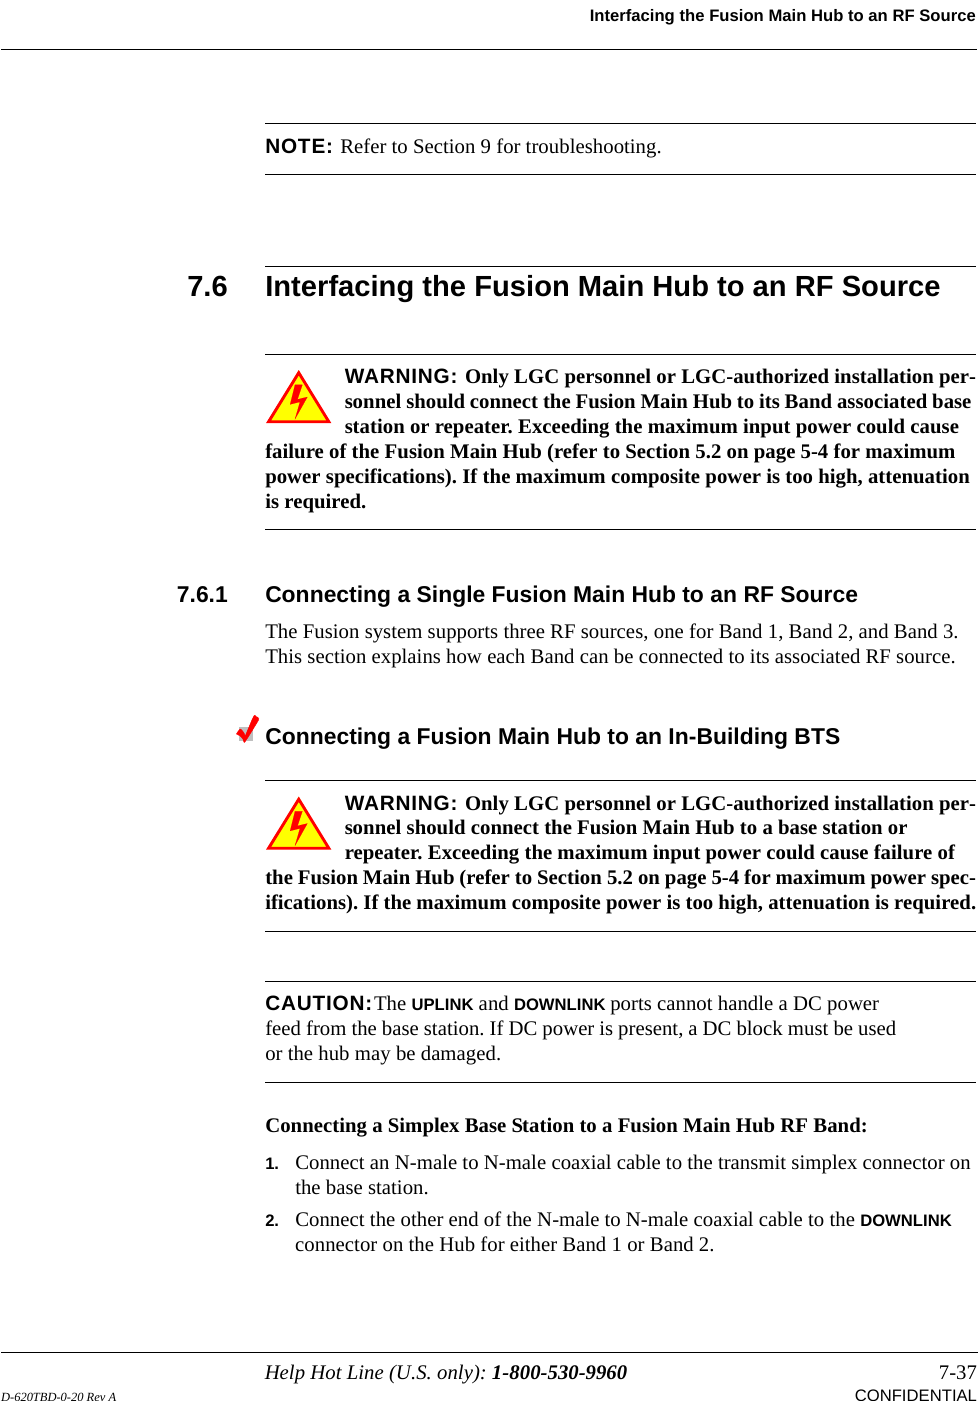 Help Hot Line (U.S. only): 1-800-530-9960 7-37D-620TBD-0-20 Rev A CONFIDENTIALInterfacing the Fusion Main Hub to an RF SourceNOTE: Refer to Section 9 for troubleshooting. 7.6 Interfacing the Fusion Main Hub to an RF SourceWARNING: Only LGC personnel or LGC-authorized installation per-sonnel should connect the Fusion Main Hub to its Band associated base station or repeater. Exceeding the maximum input power could cause failure of the Fusion Main Hub (refer to Section 5.2 on page 5-4 for maximum power specifications). If the maximum composite power is too high, attenuation is required.7.6.1 Connecting a Single Fusion Main Hub to an RF SourceThe Fusion system supports three RF sources, one for Band 1, Band 2, and Band 3. This section explains how each Band can be connected to its associated RF source.Connecting a Fusion Main Hub to an In-Building BTSWARNING: Only LGC personnel or LGC-authorized installation per-sonnel should connect the Fusion Main Hub to a base station or repeater. Exceeding the maximum input power could cause failure of the Fusion Main Hub (refer to Section 5.2 on page 5-4 for maximum power spec-ifications). If the maximum composite power is too high, attenuation is required.CAUTION:The UPLINK and DOWNLINK ports cannot handle a DC power feed from the base station. If DC power is present, a DC block must be used or the hub may be damaged.Connecting a Simplex Base Station to a Fusion Main Hub RF Band:1. Connect an N-male to N-male coaxial cable to the transmit simplex connector on the base station.2. Connect the other end of the N-male to N-male coaxial cable to the DOWNLINK connector on the Hub for either Band 1 or Band 2.